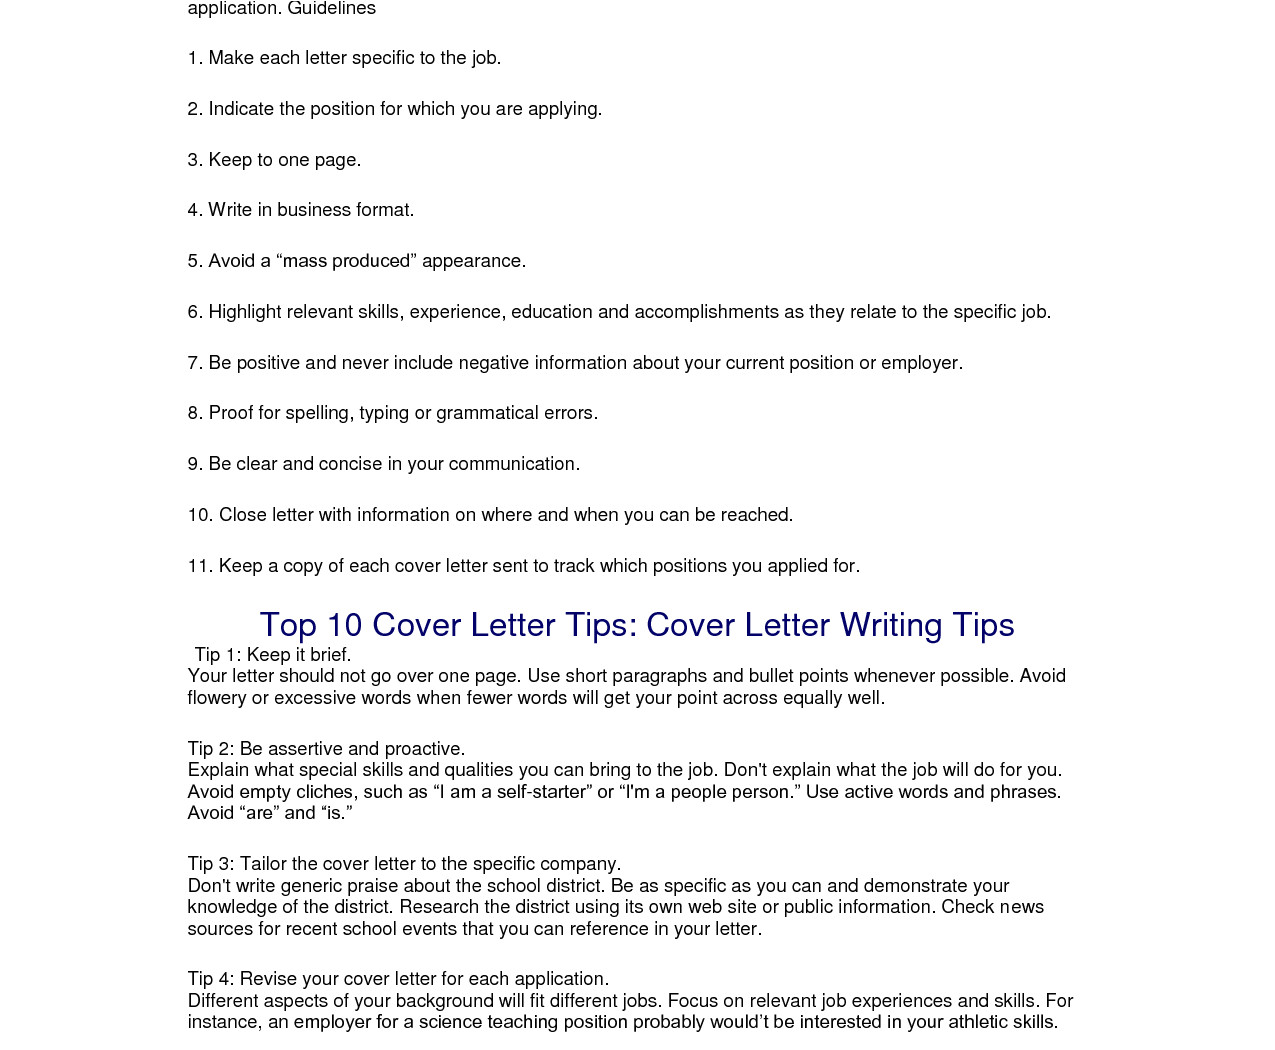 what is the best way to format a cover letter